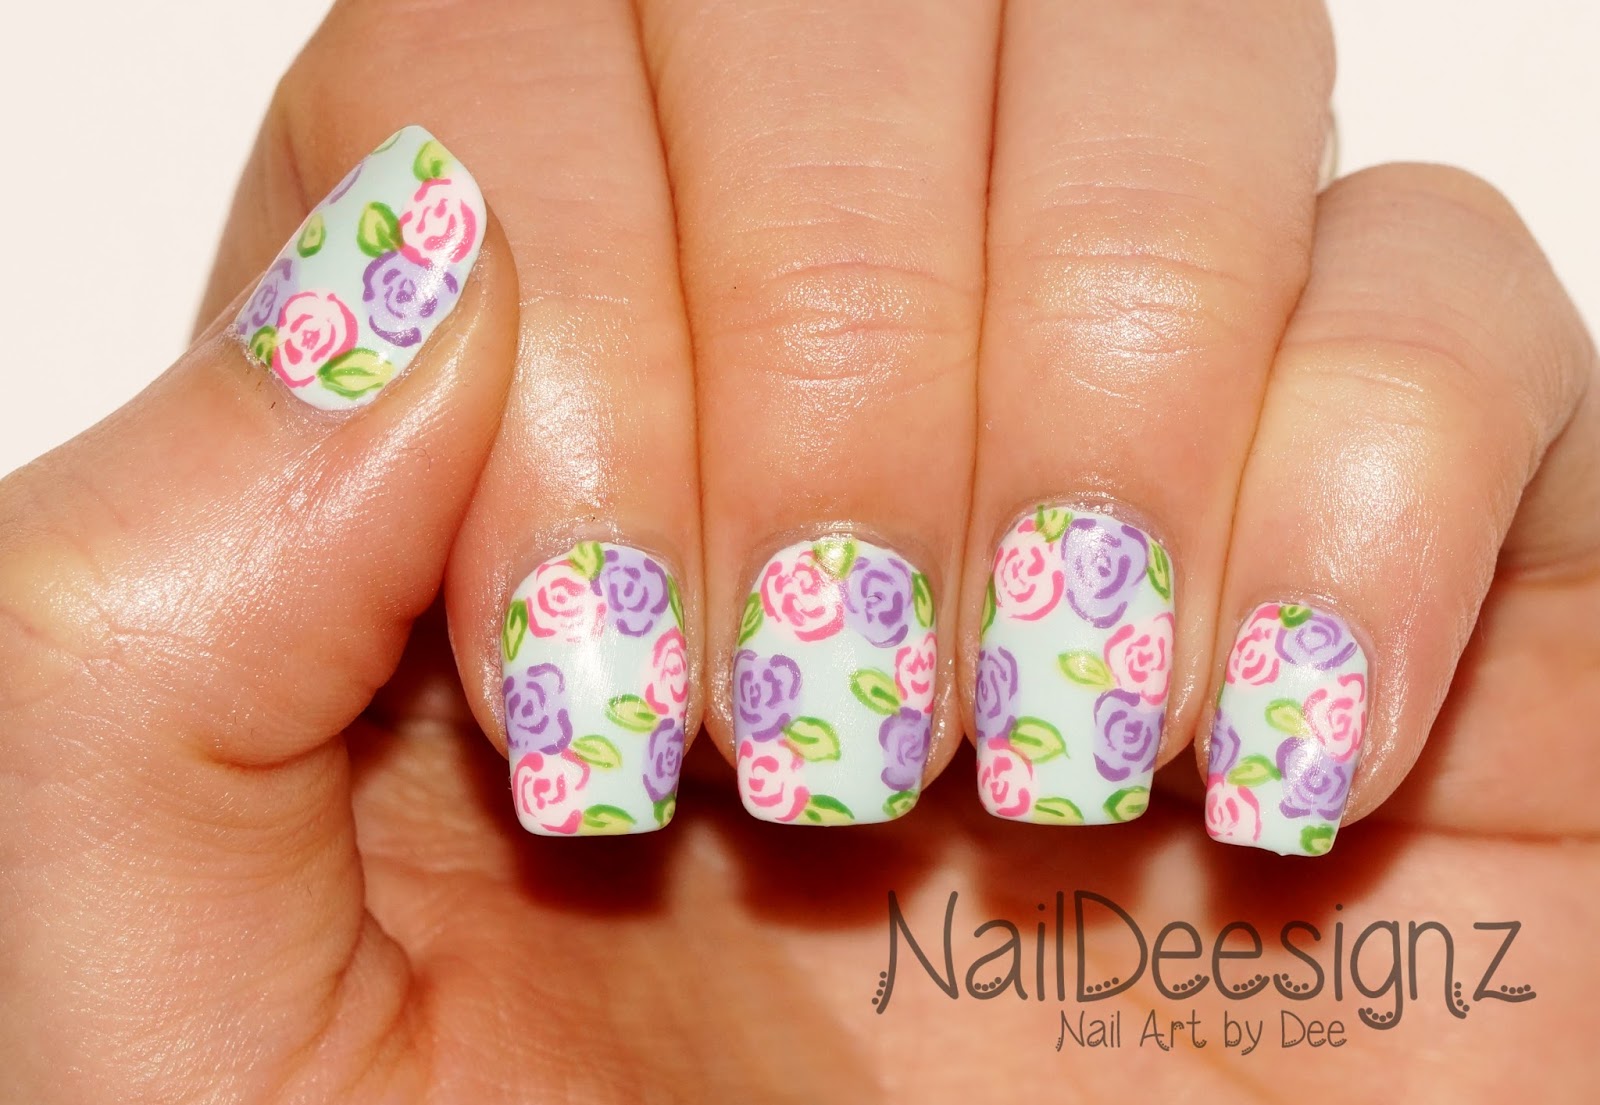 7. Realistic Floral Nail Art Designs - wide 6